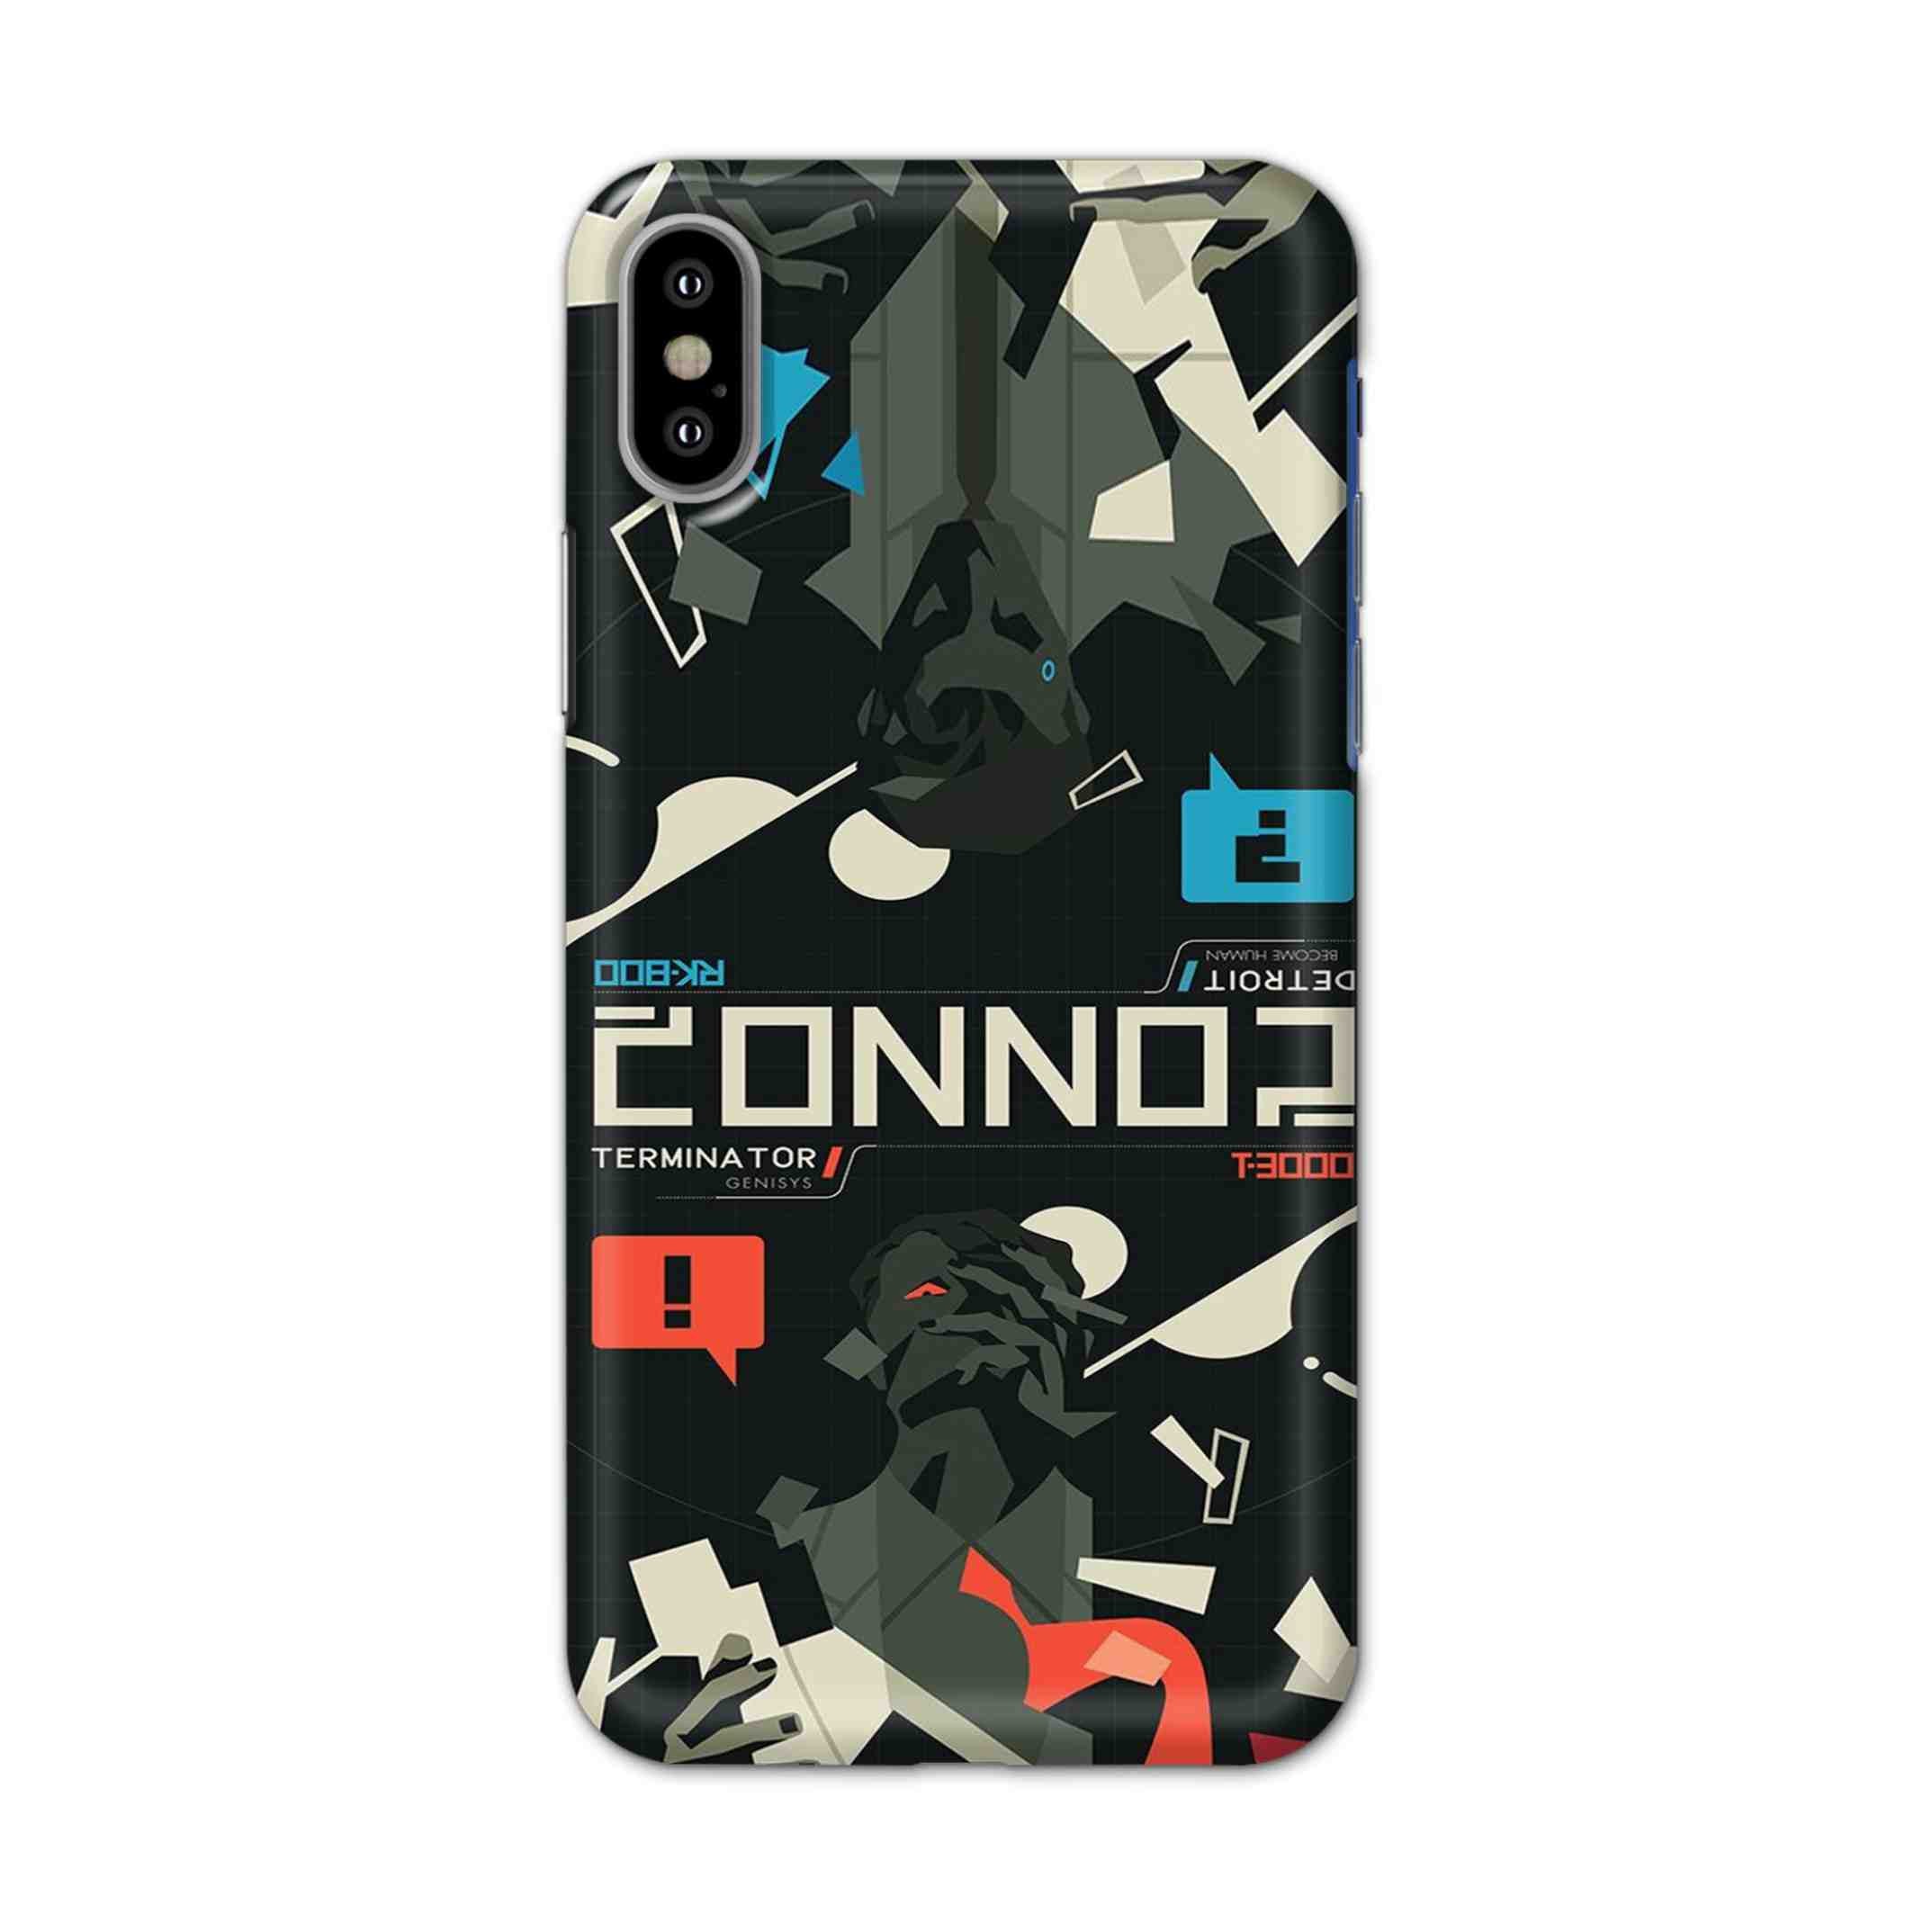 Buy Terminator Hard Back Mobile Phone Case/Cover For iPhone X Online